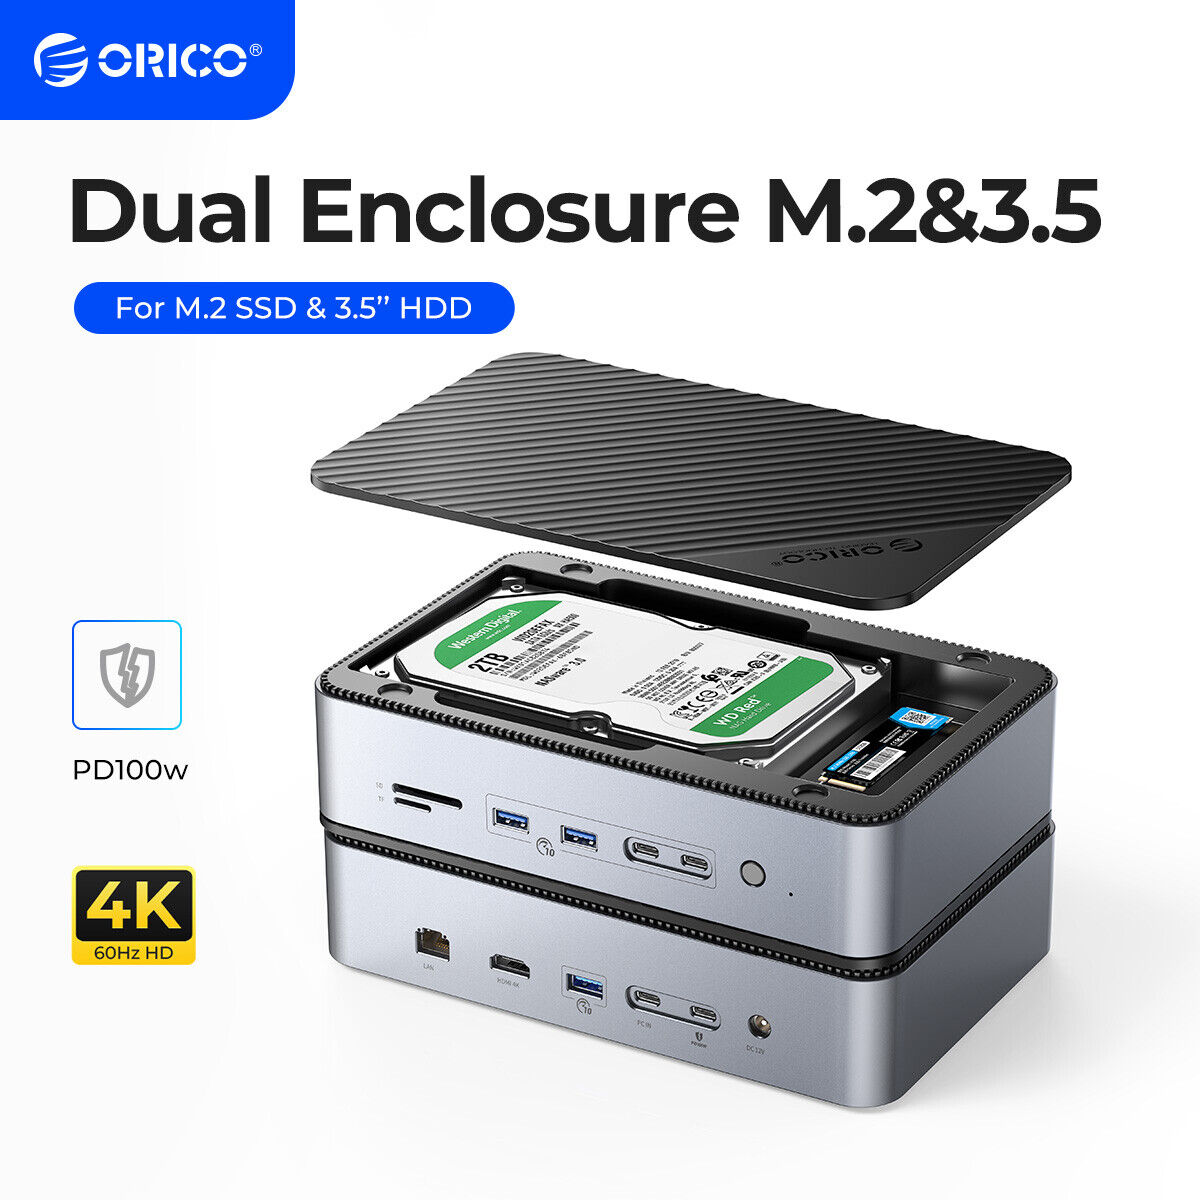 ORICO 10 in 1 Docking Station & M.2 NVMe Enclosure 2.5/3.5 inch Drive Enclosure